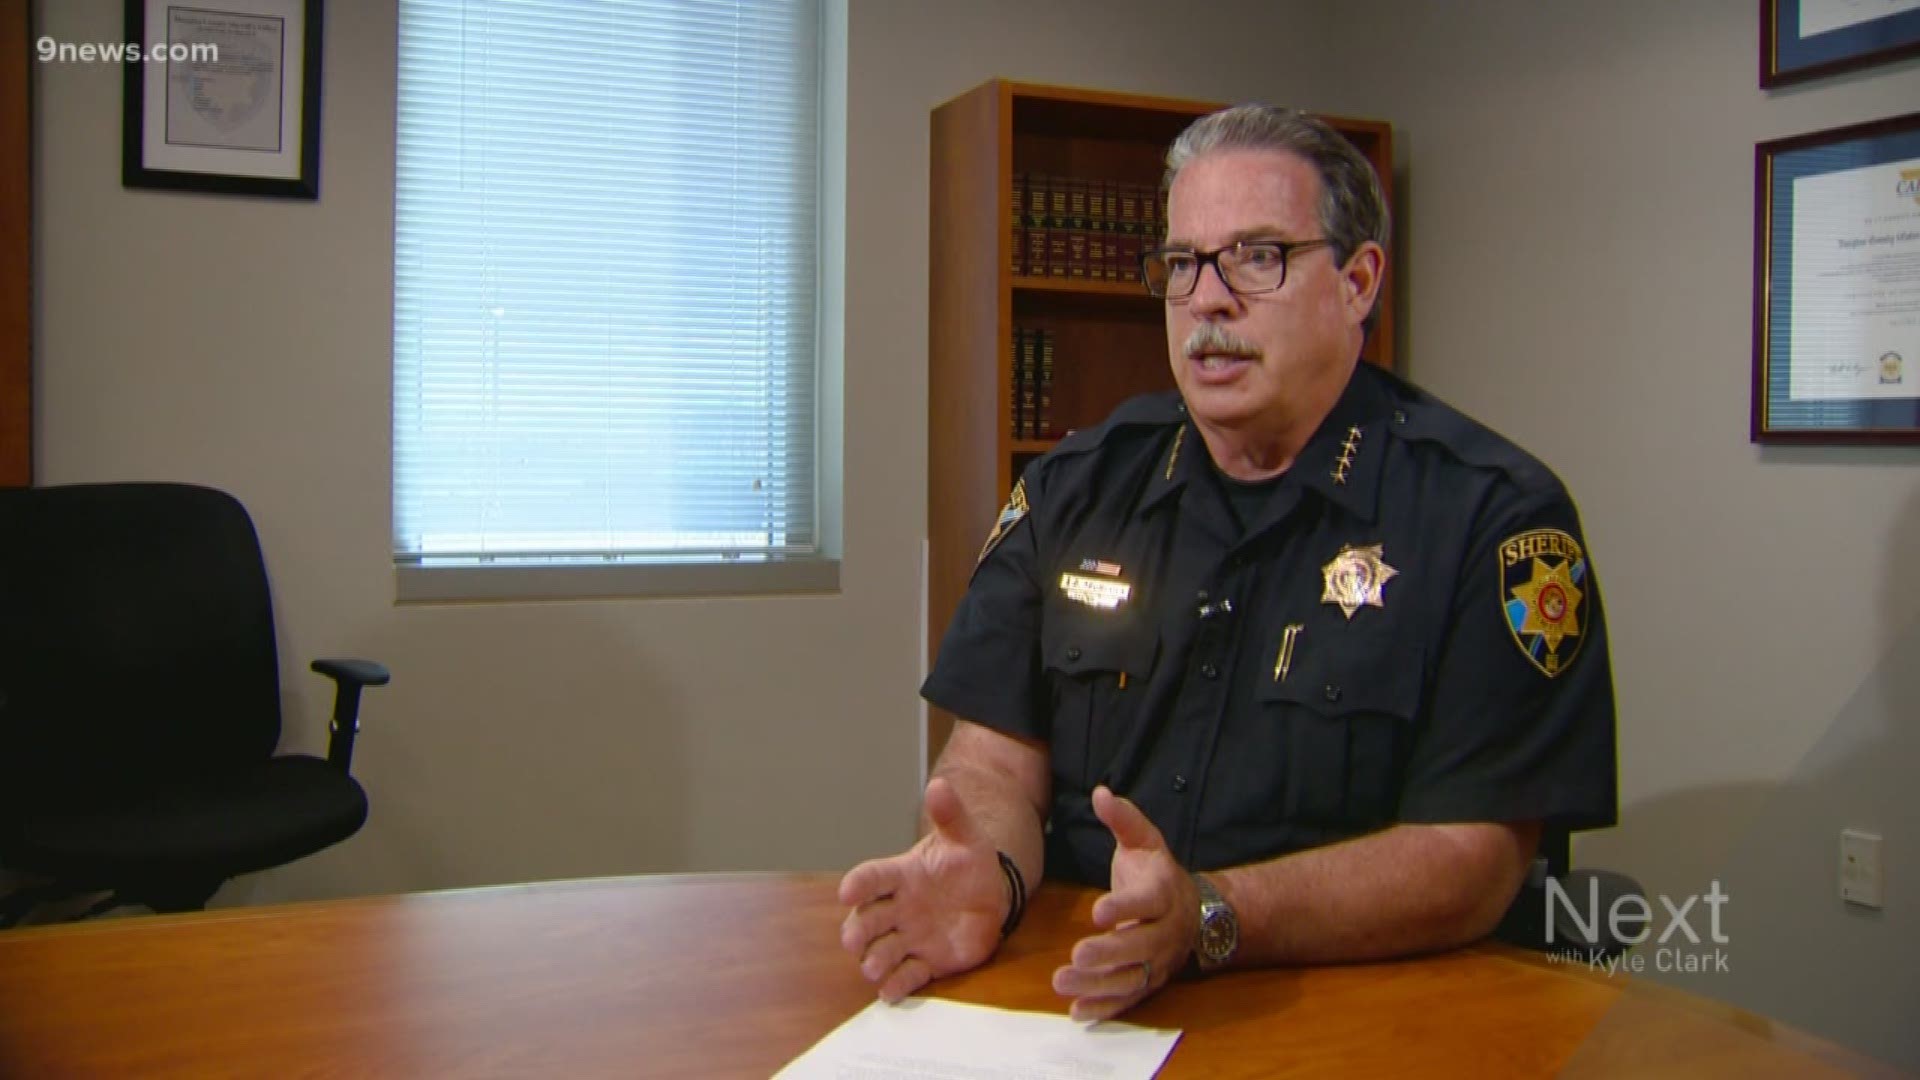 Sheriff Tony Spurlock says it's not as alarming as it sounds, and there are still 87 deputies certified.